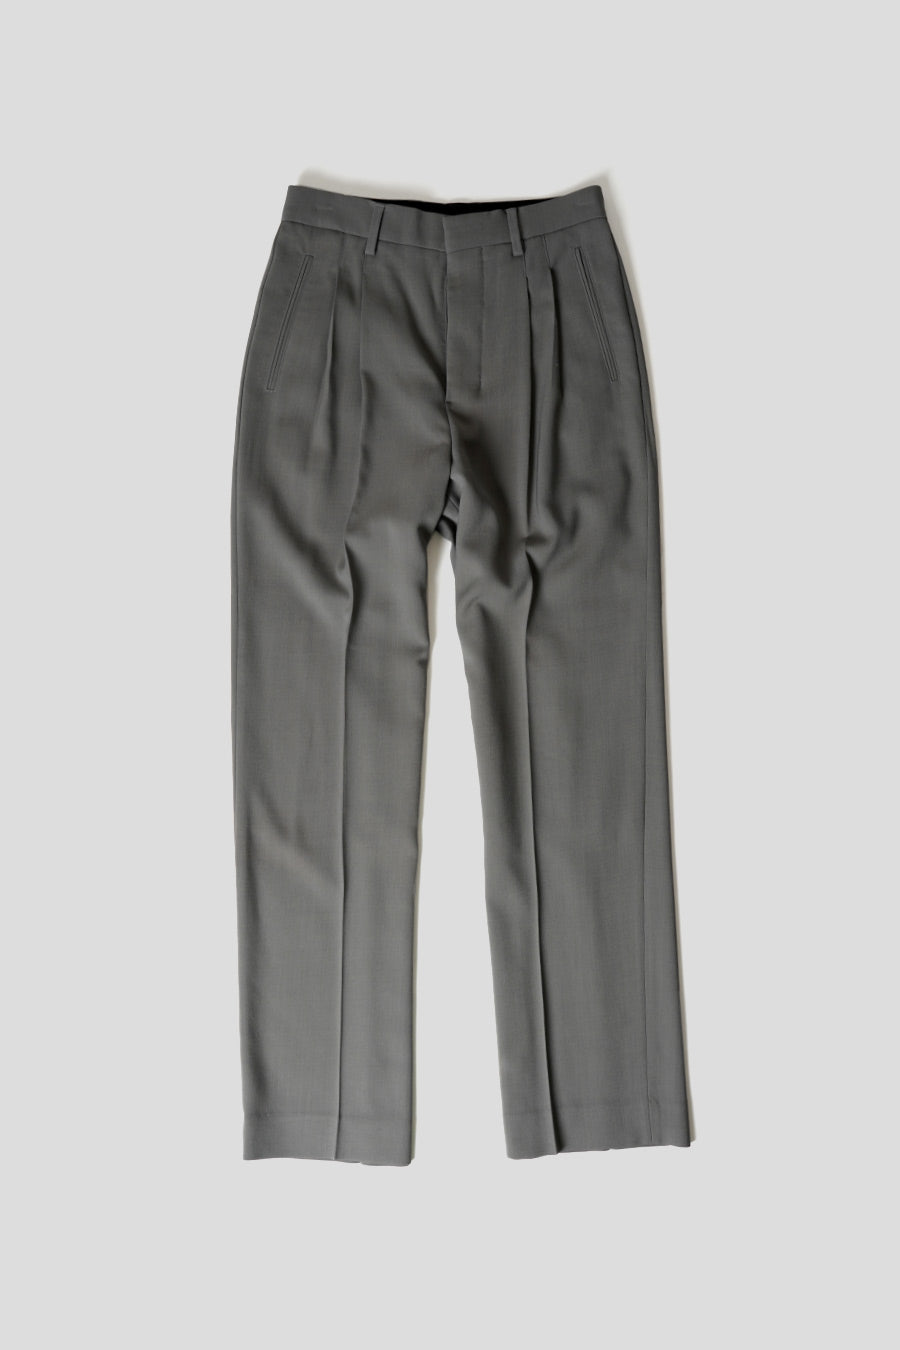 AMI PARIS - MINERAL GREY STRAIGHT FIT TROUSERS - LE LABO STORE